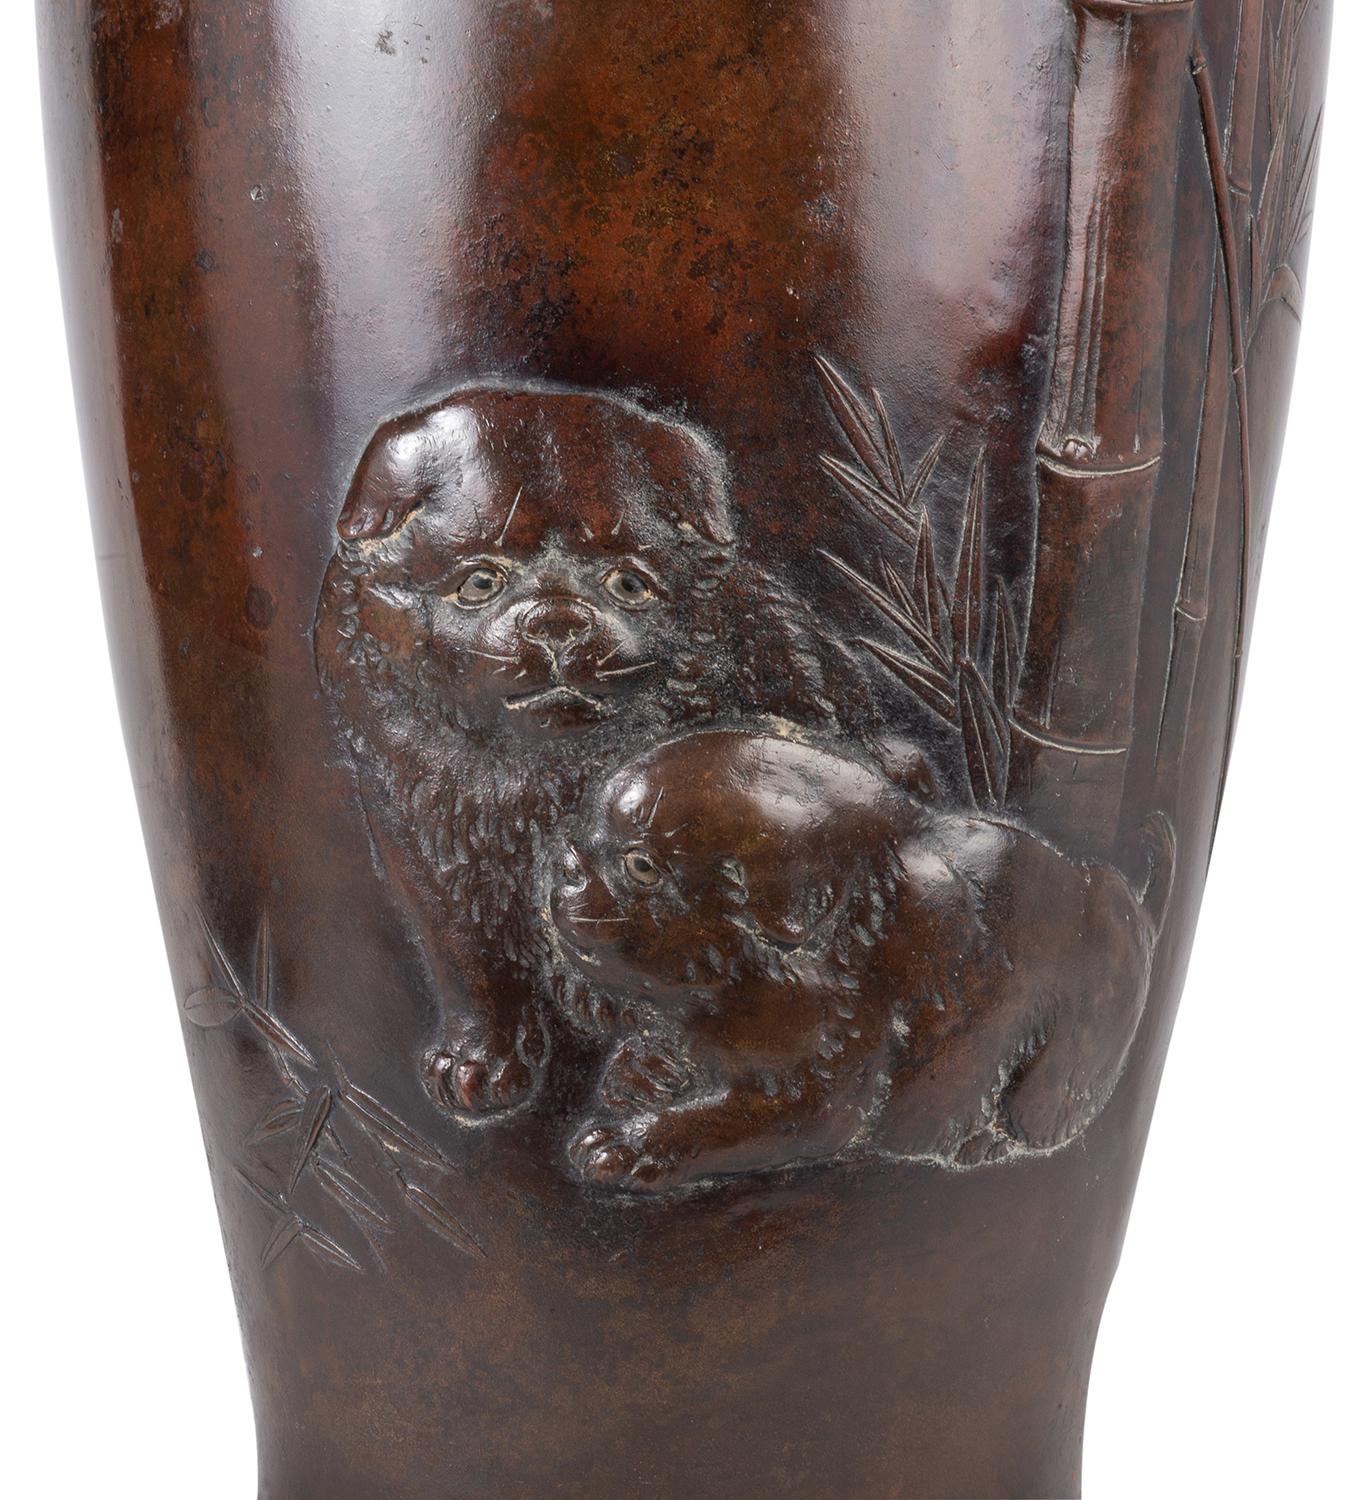 A very good quality Meiji period (1868-1912) Japanese patinated bronze vase, depicting two seated dogs below a Bamboo plant.